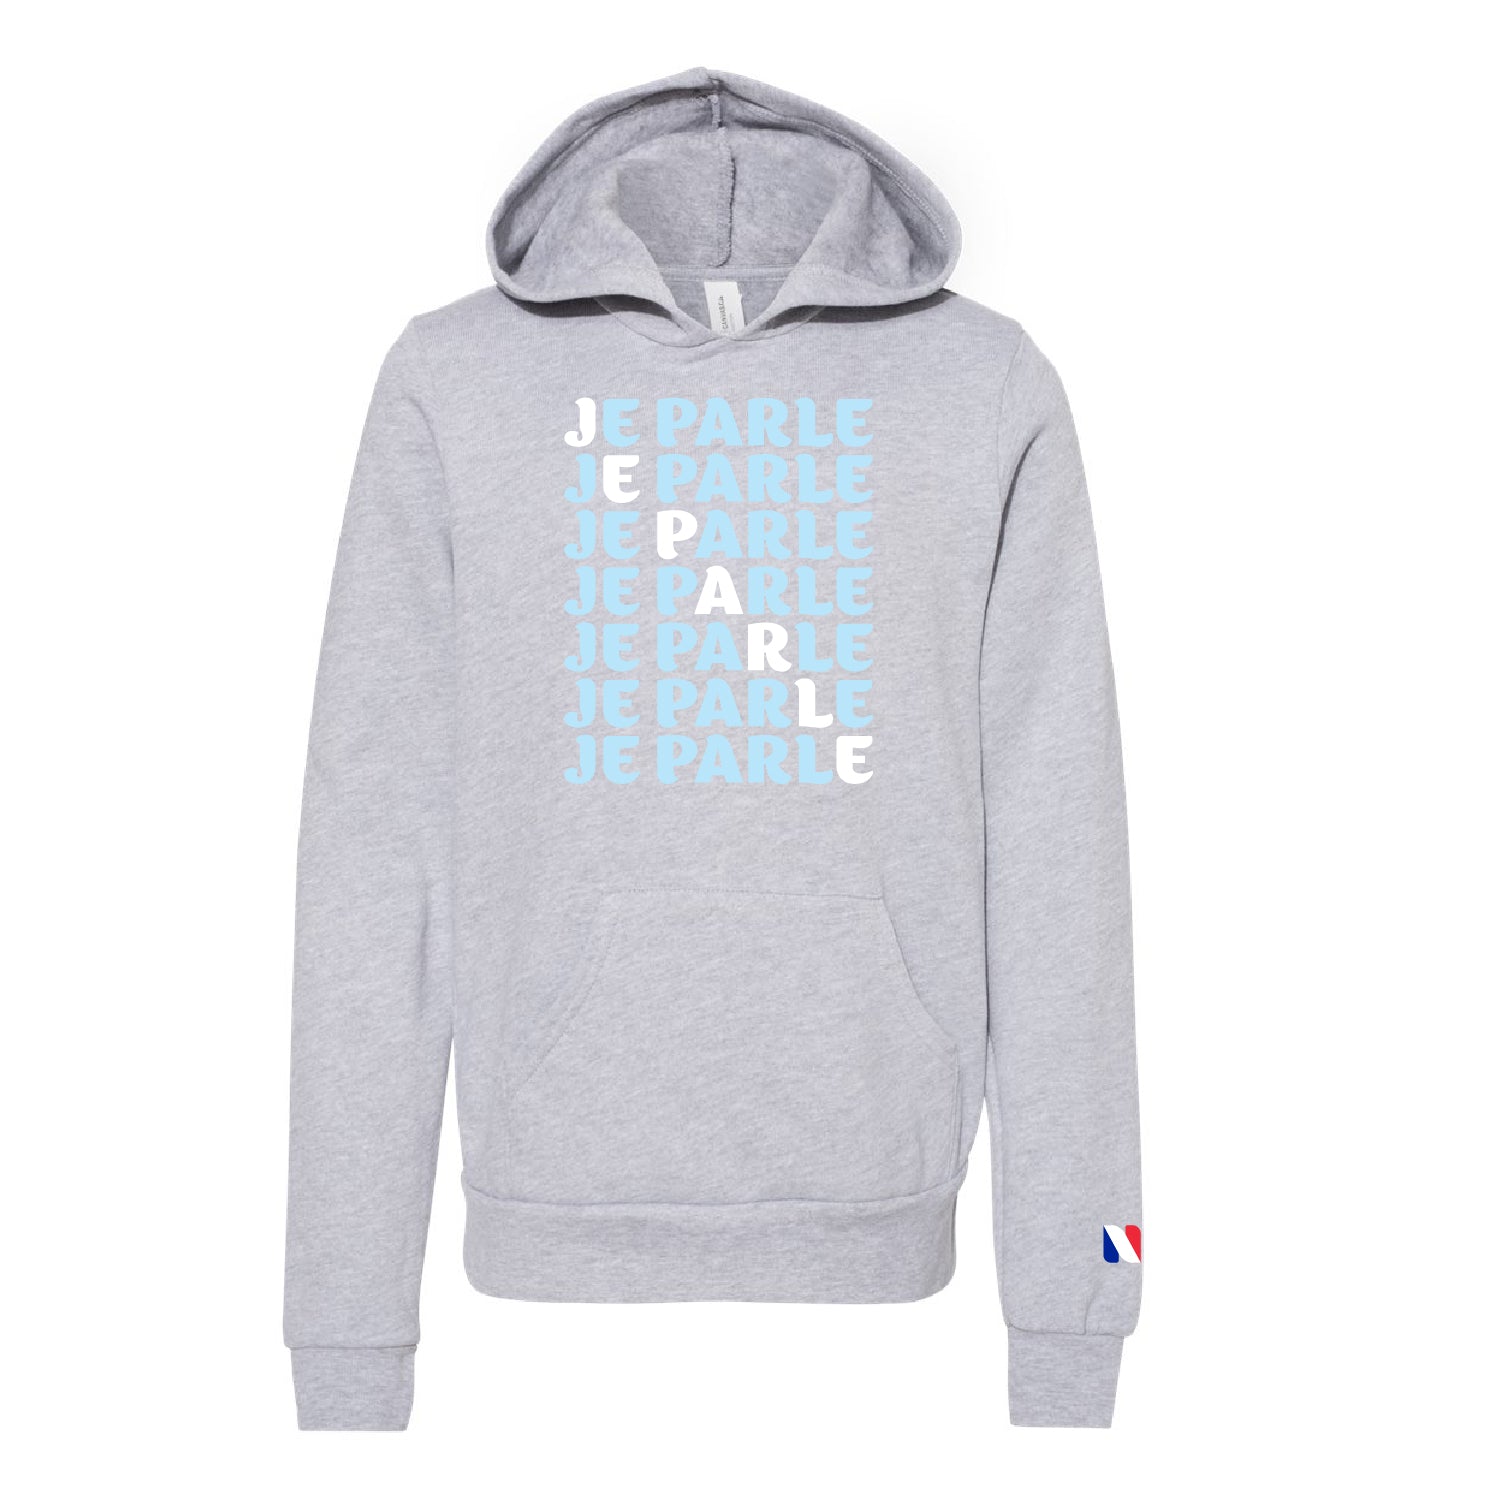 JE PARLE – YOUTH FLEECE HOODIE - DSP On Demand